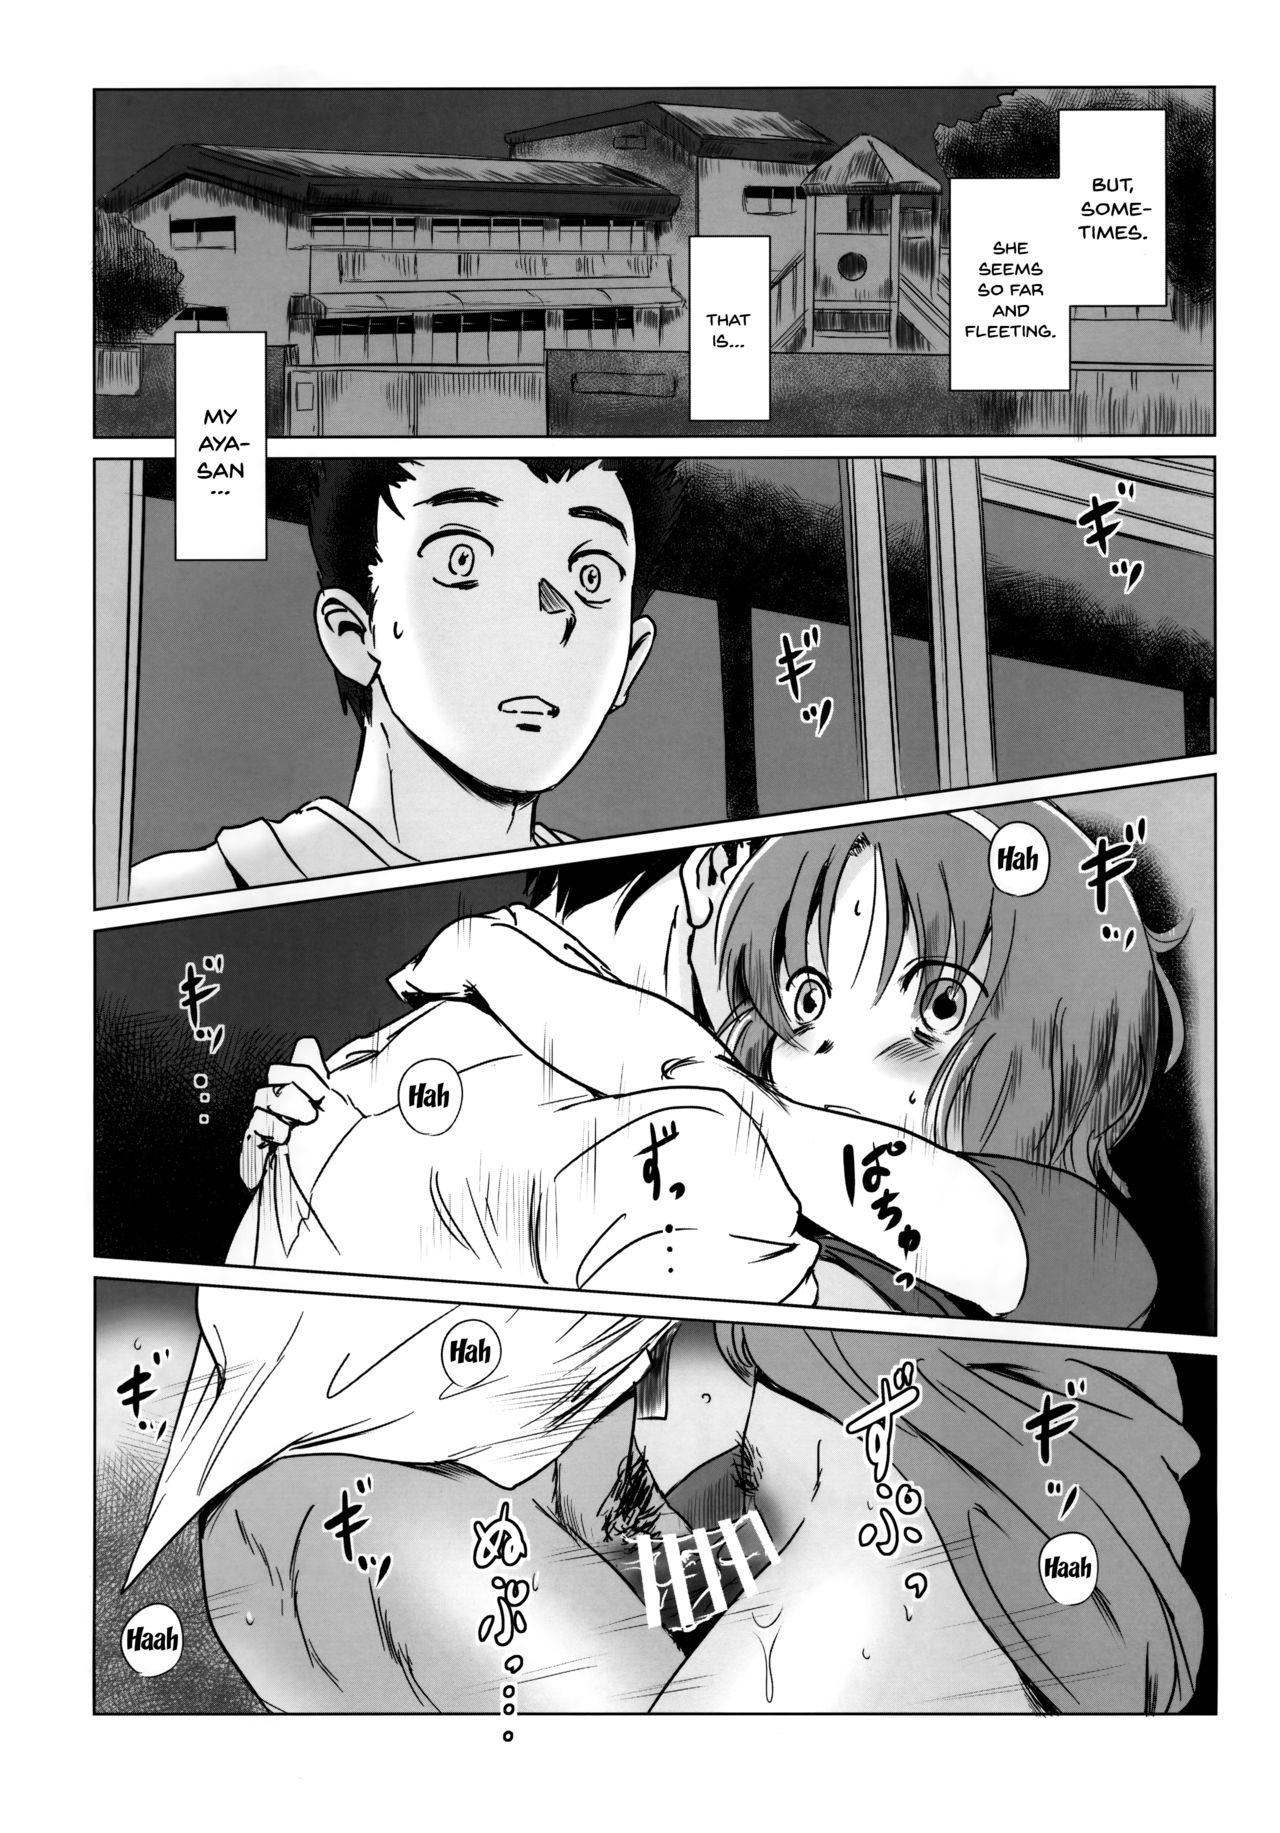 Olderwoman Story of the 'N' Situation - Situation#1 Kyouhaku - Original Movie - Page 3